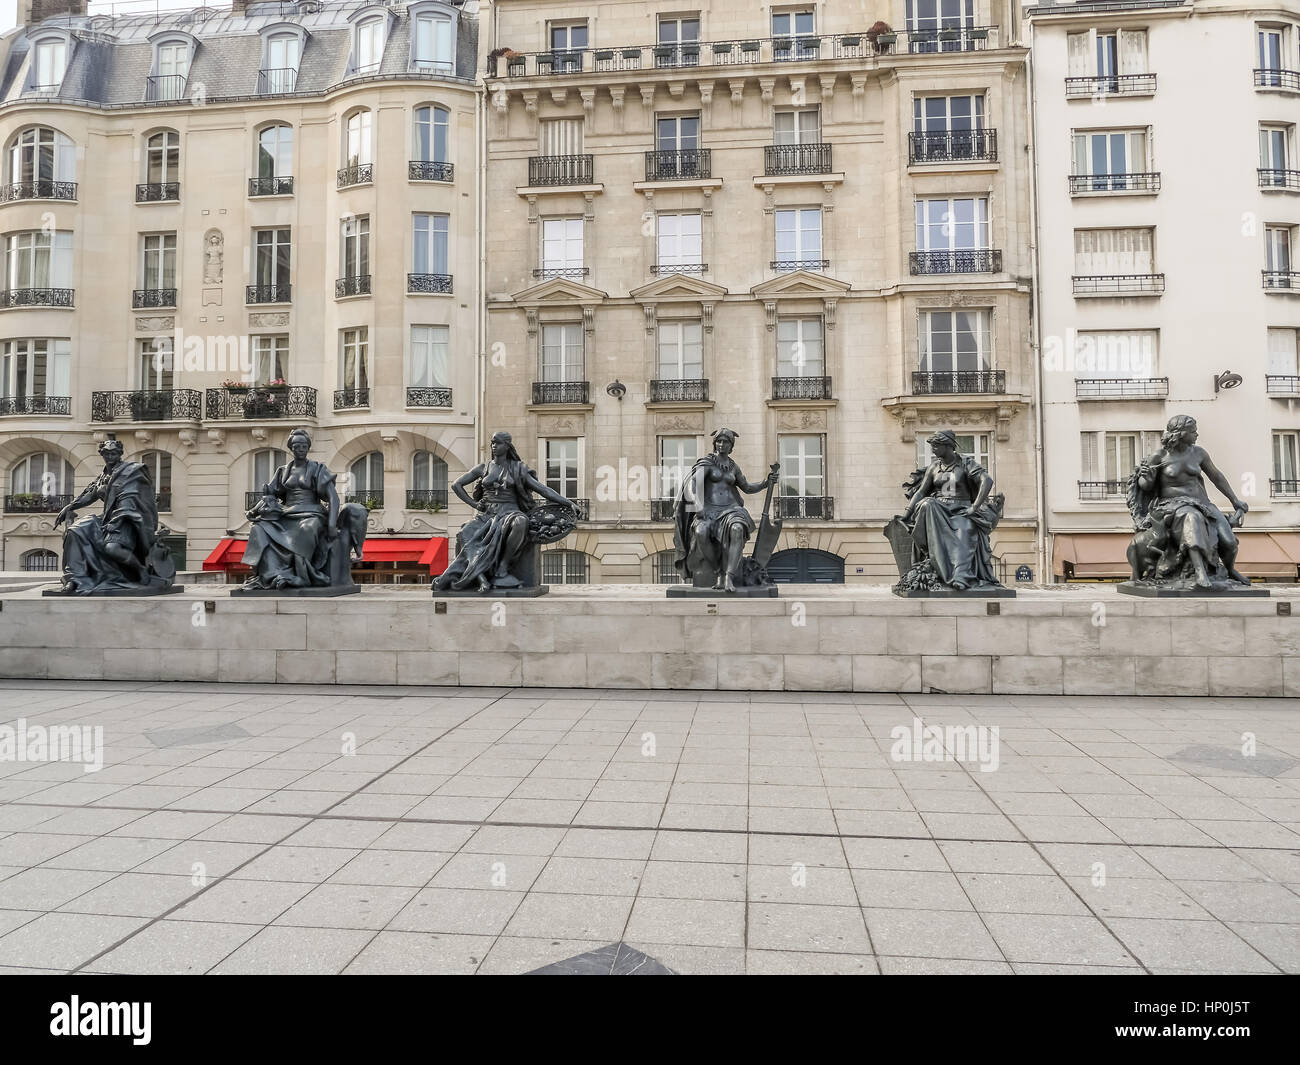 PARIS, FRANCE - 25 AUGUST, 2013 - Statues of six women representing six continents, outside of d'Orsay Museum, Paris, France Stock Photo